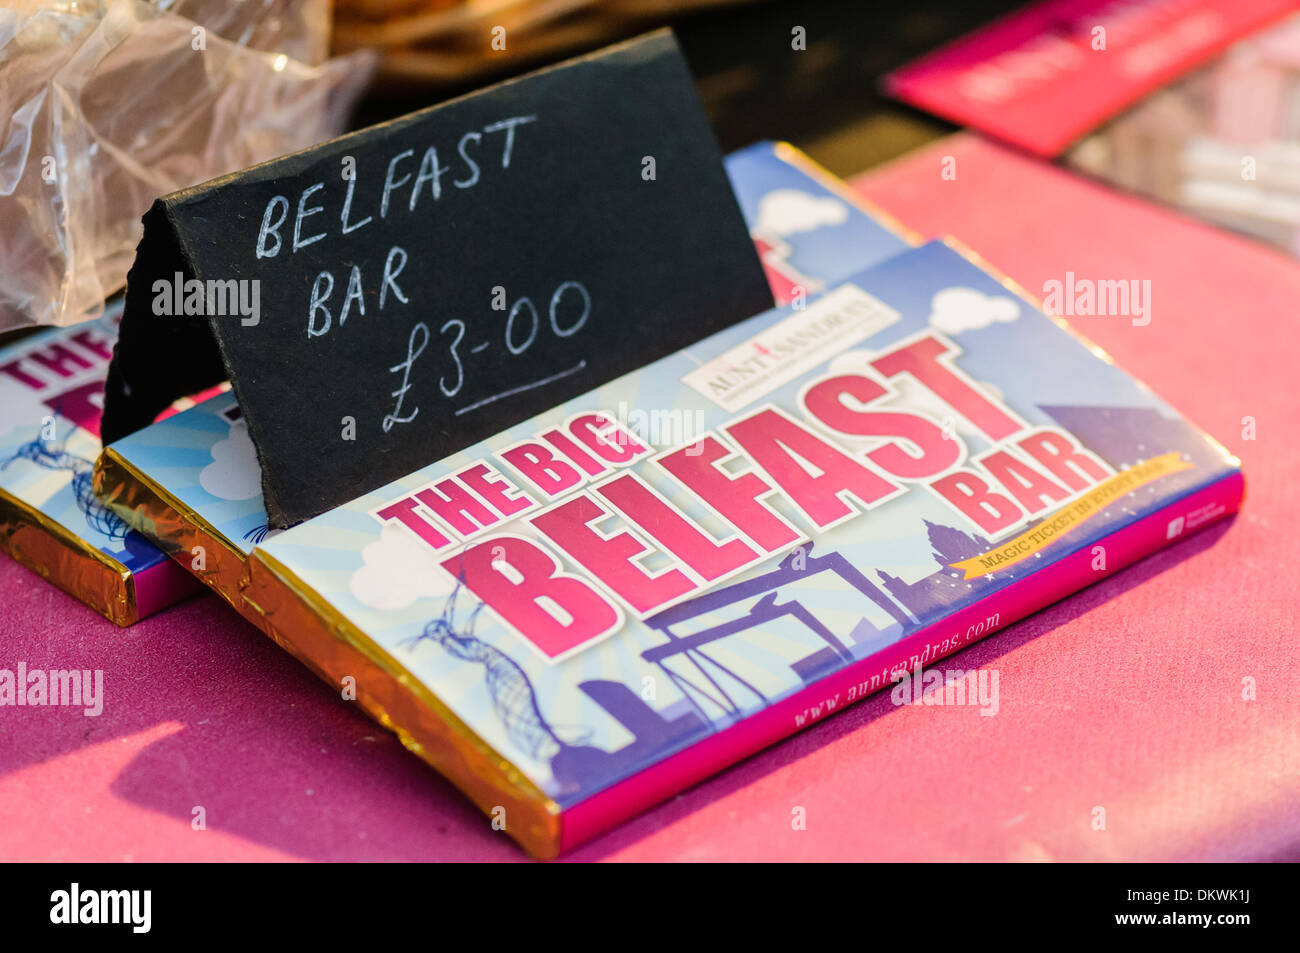 'The Big Belfast Bar' of chocolate from Aunt Sandras Sweet Shop Stock Photo